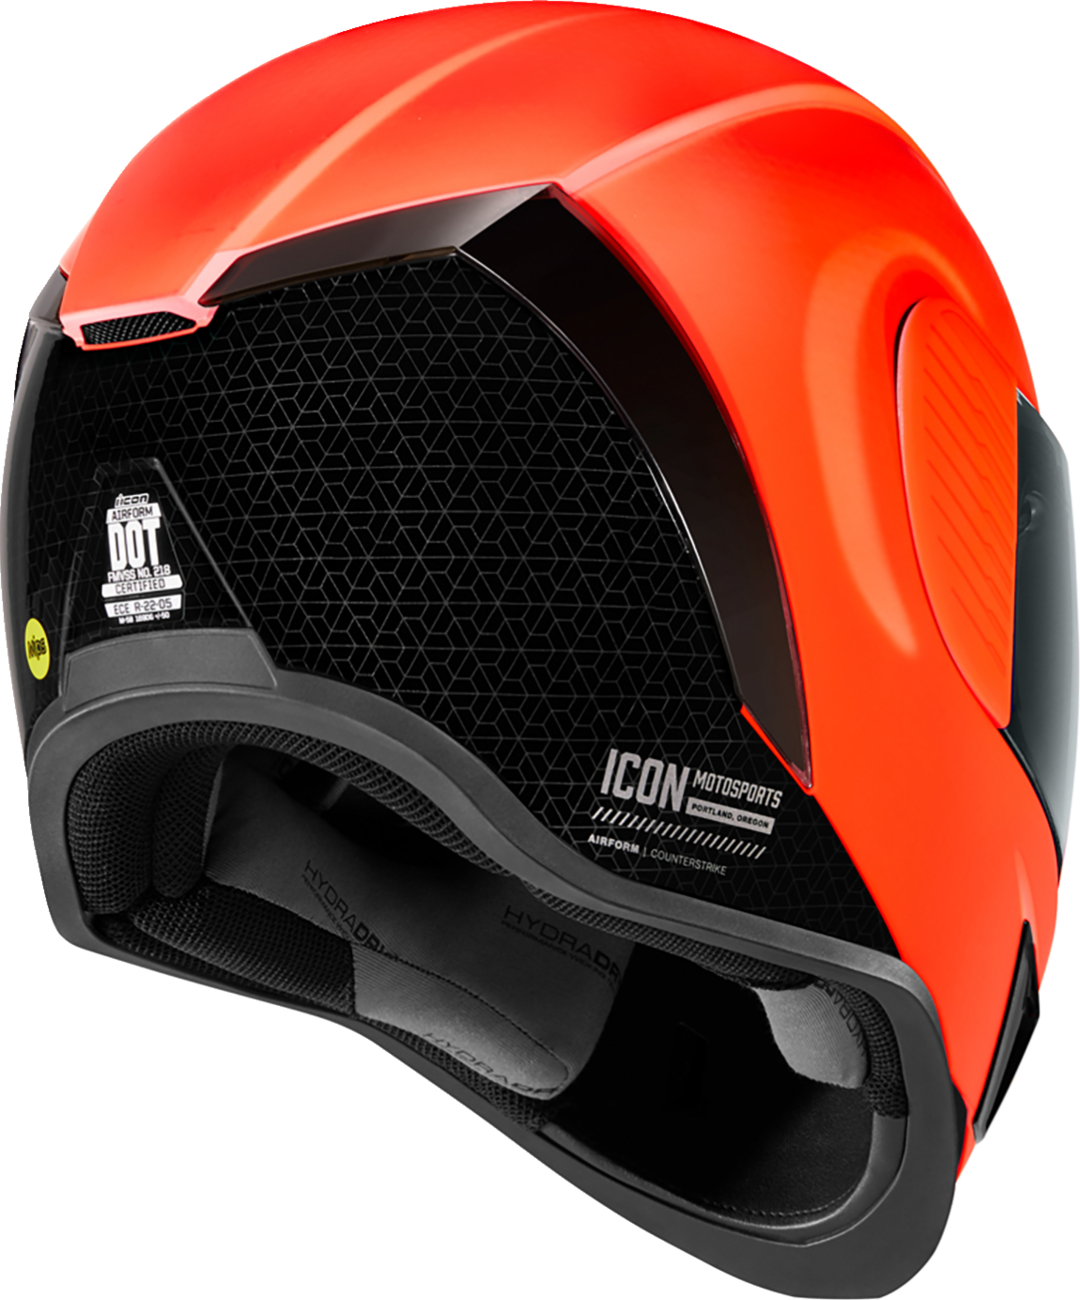 ICON Airform™ Helmet - MIPS® - Counterstrike - Red - XS 0101-15085